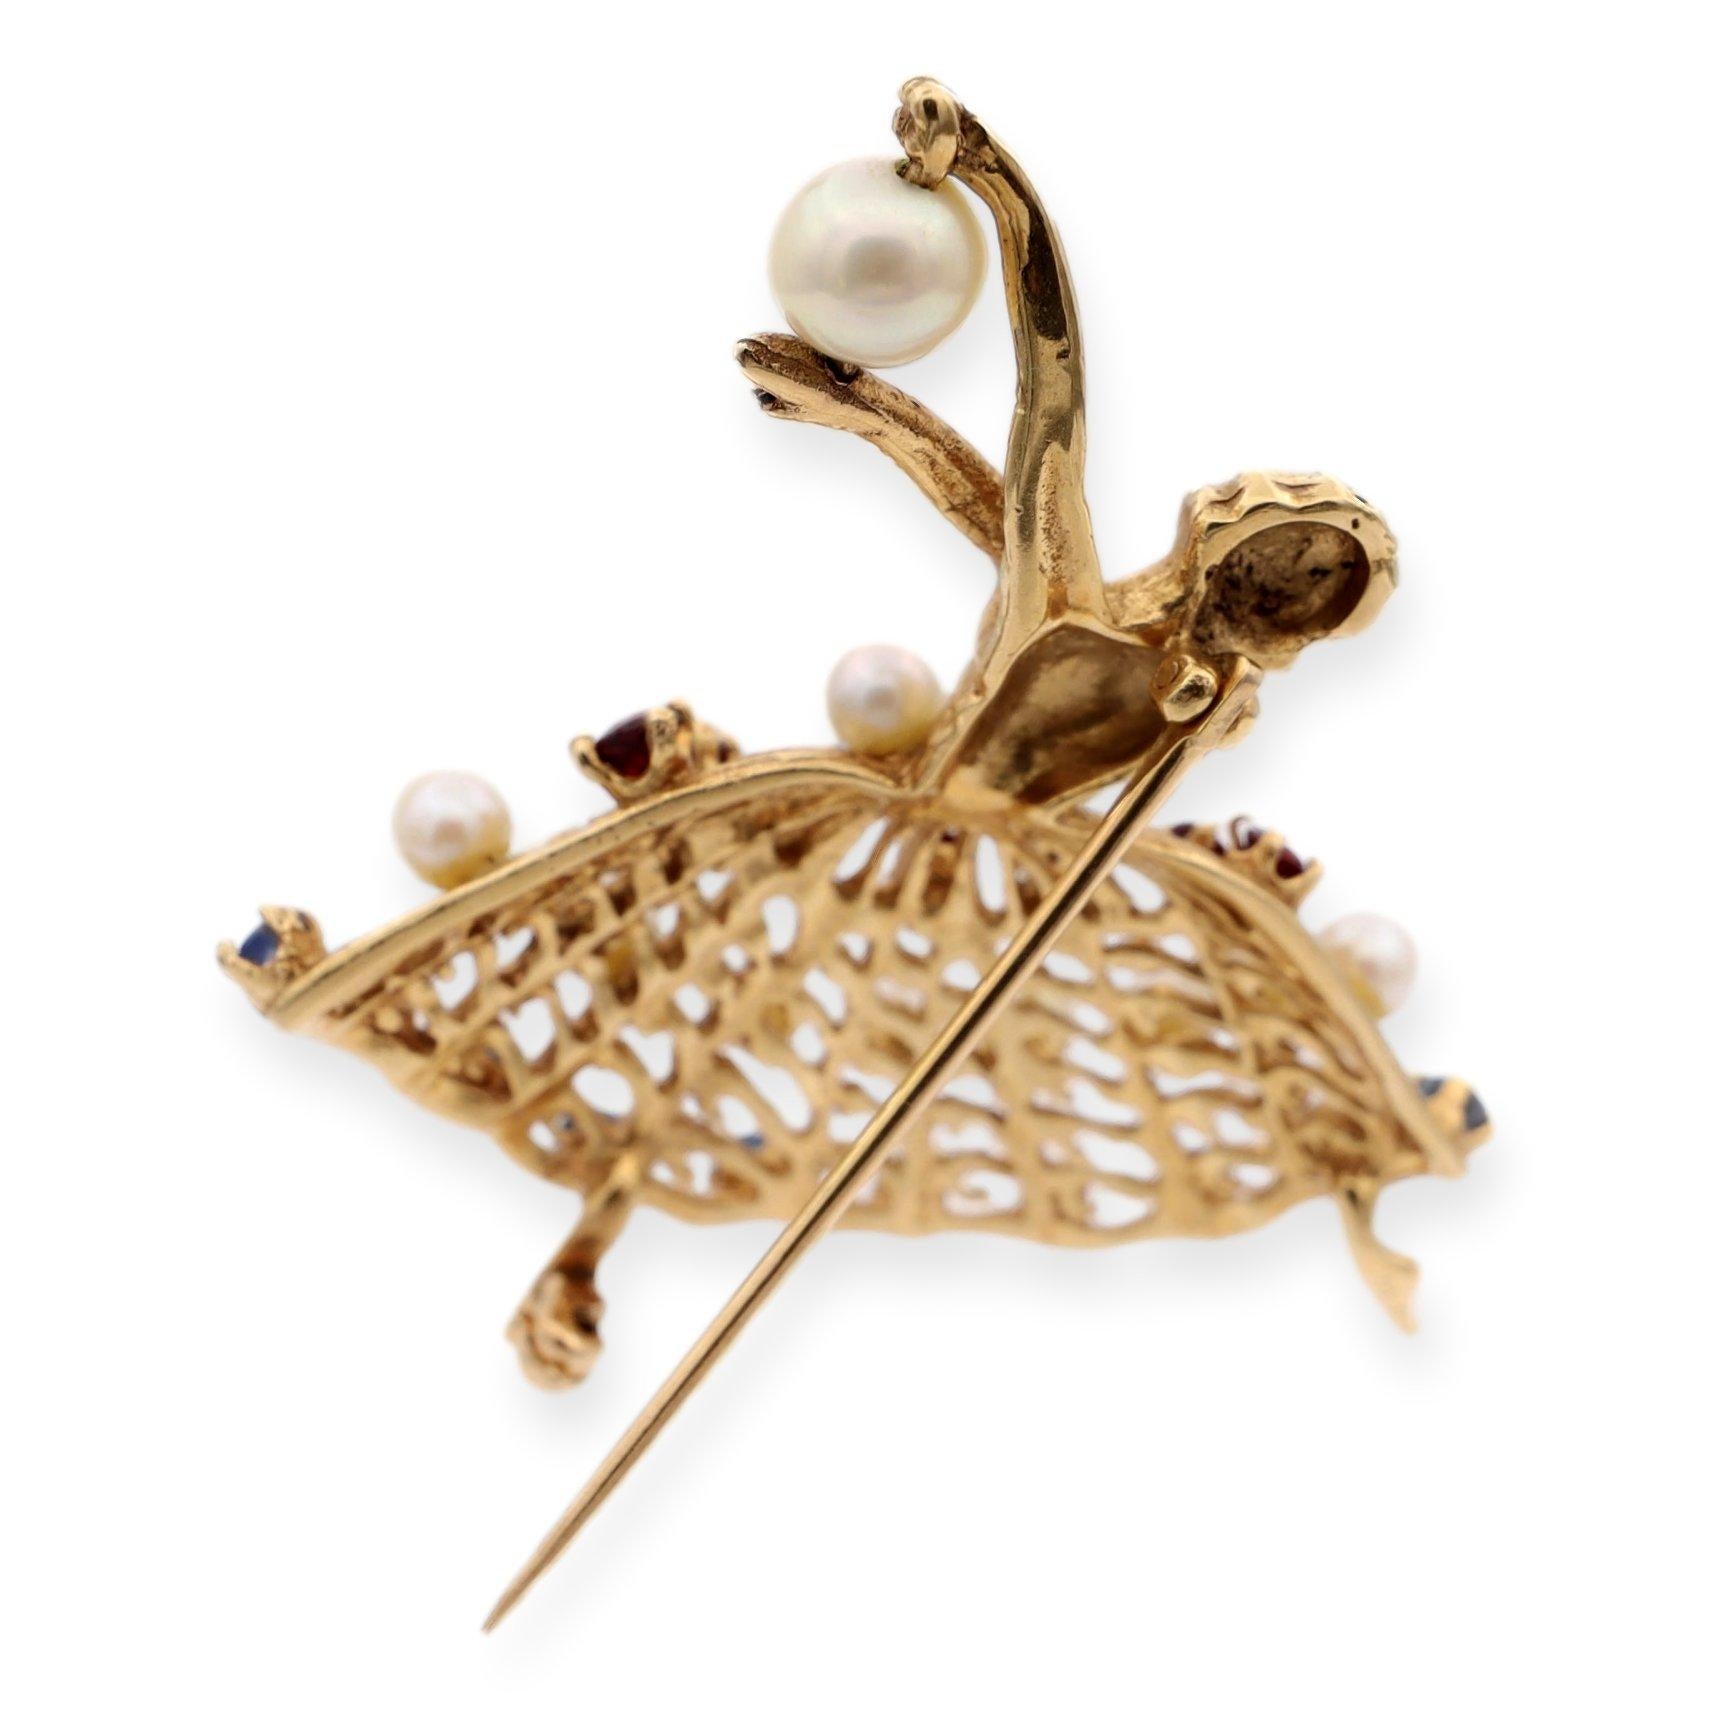 Vintage Ballerina Brooch finely crafted in 14 karat yellow gold. Its exquisite detailing showcases a graceful ballerina figure, capturing the elegance and charm of classical ballet. Adorned with a stunning combination of rubies, blue topaz, and